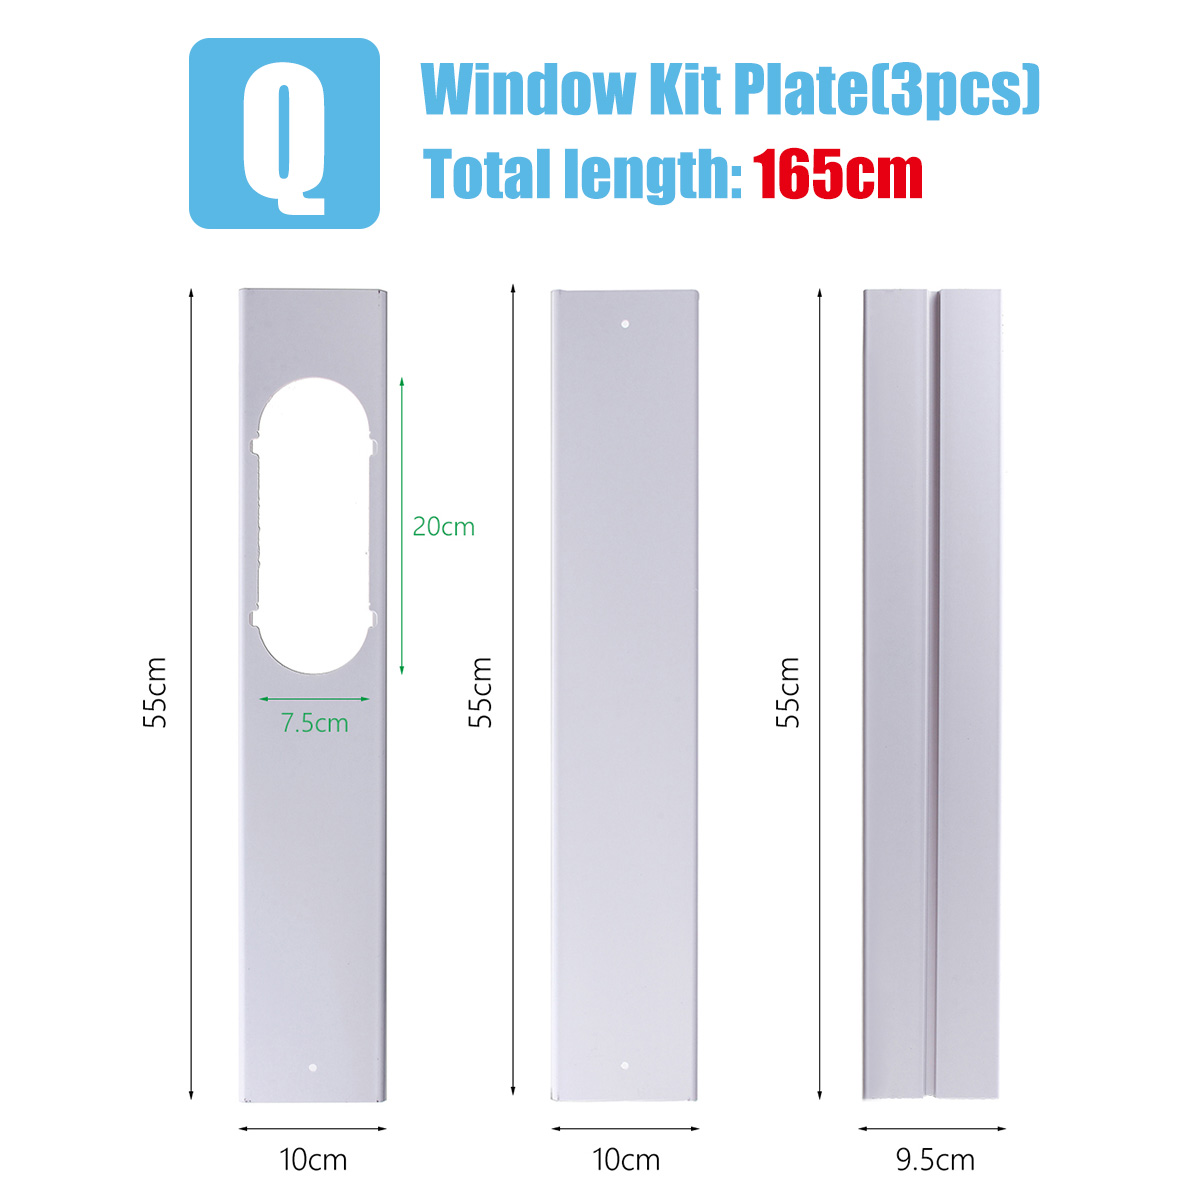 3Pcs-55-165cm-Adjustable-Window-Slide-Kit-Plate-Air-Conditioner-Wind-Shield-For-Portable-Air-Conditi-1632431-1